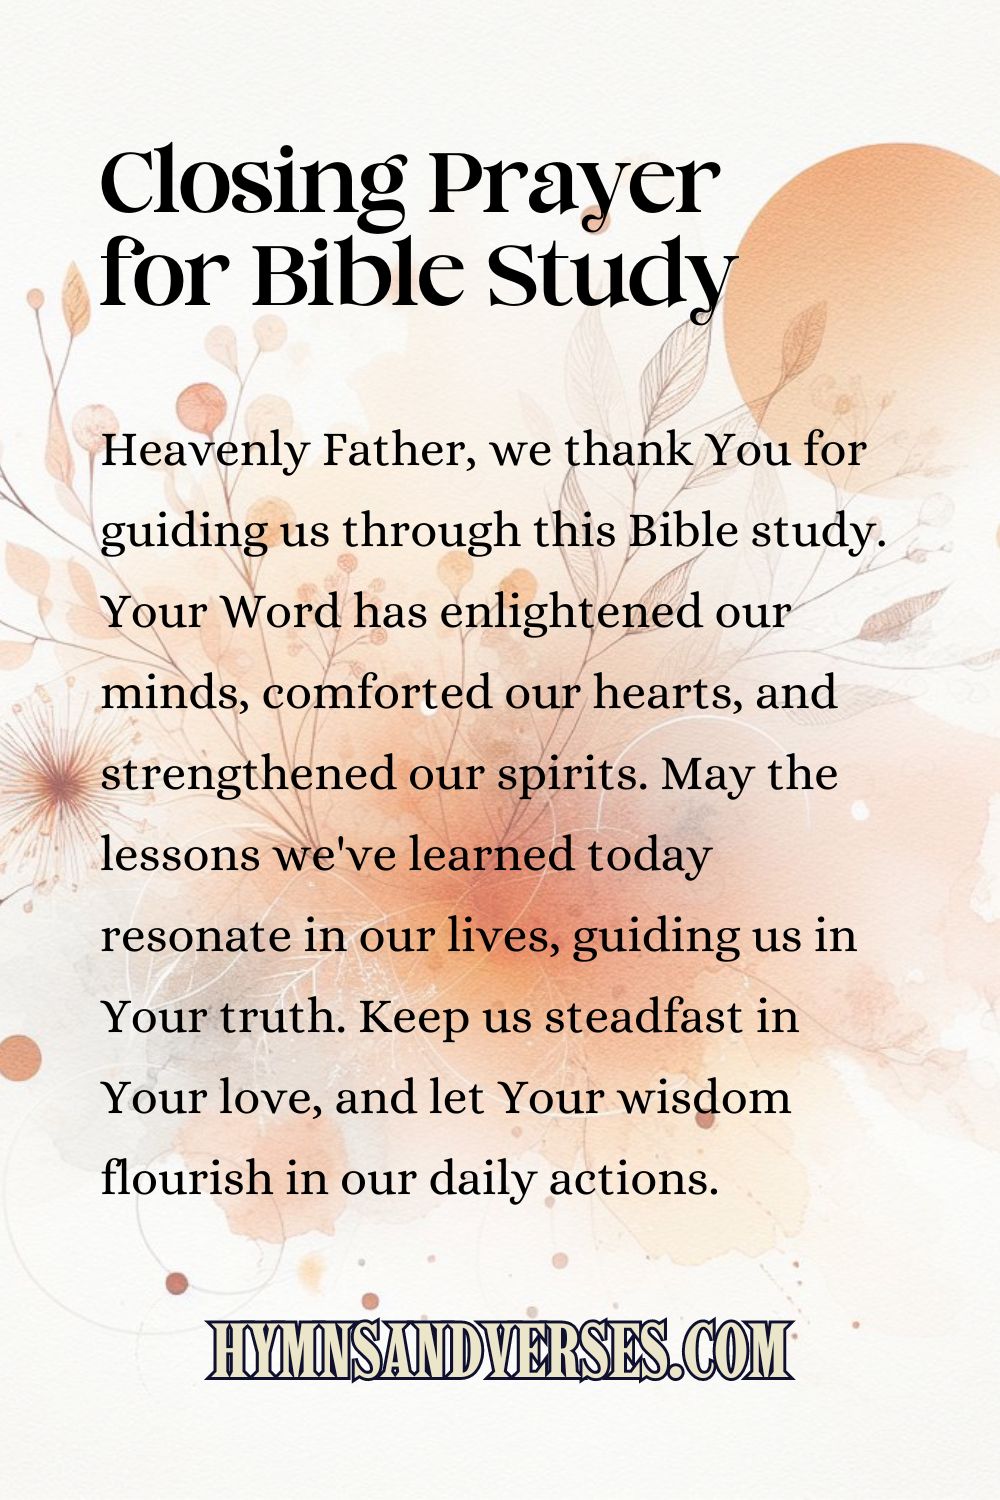 Pin sized image for closing prayer for bible study, reads: Heavenly Father, we thank You for guiding us through this Bible study. Your Word has enlightened our minds, comforted our hearts, and strengthened our spirits. May the lessons we've learned today resonate in our lives, guiding us in Your truth. Keep us steadfast in Your love, and let Your wisdom flourish in our daily actions.